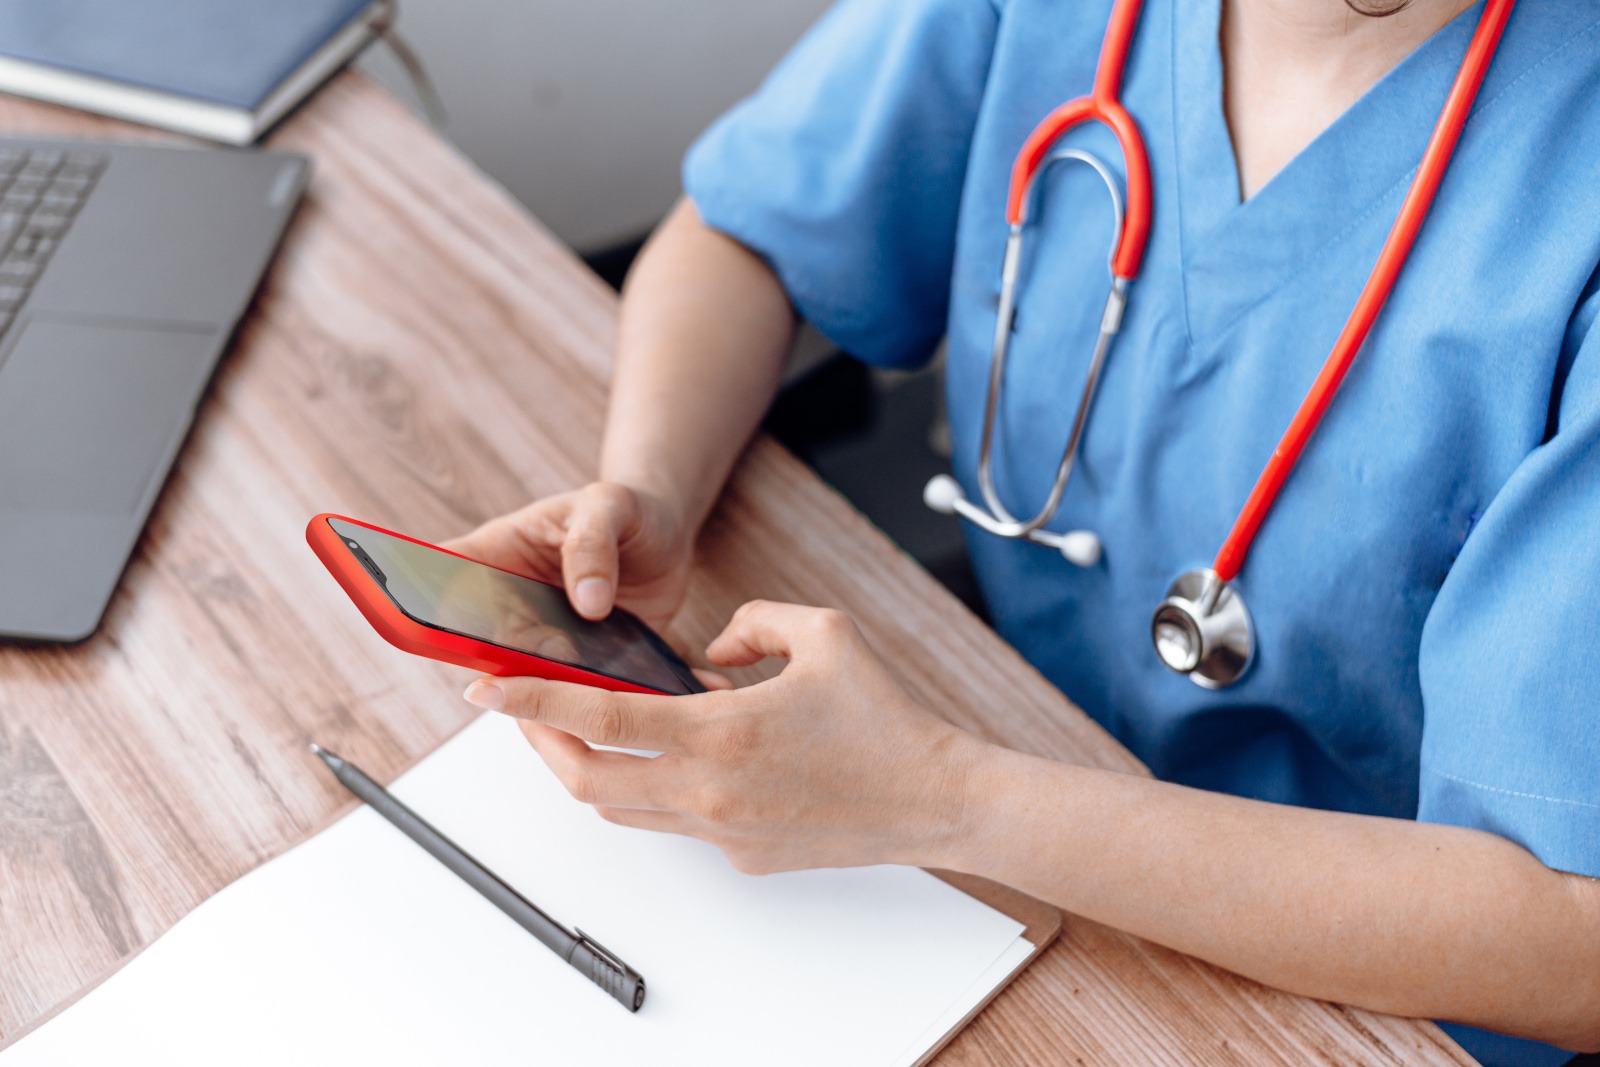 Nurse using the WorkTracker workshift appointments app at desk